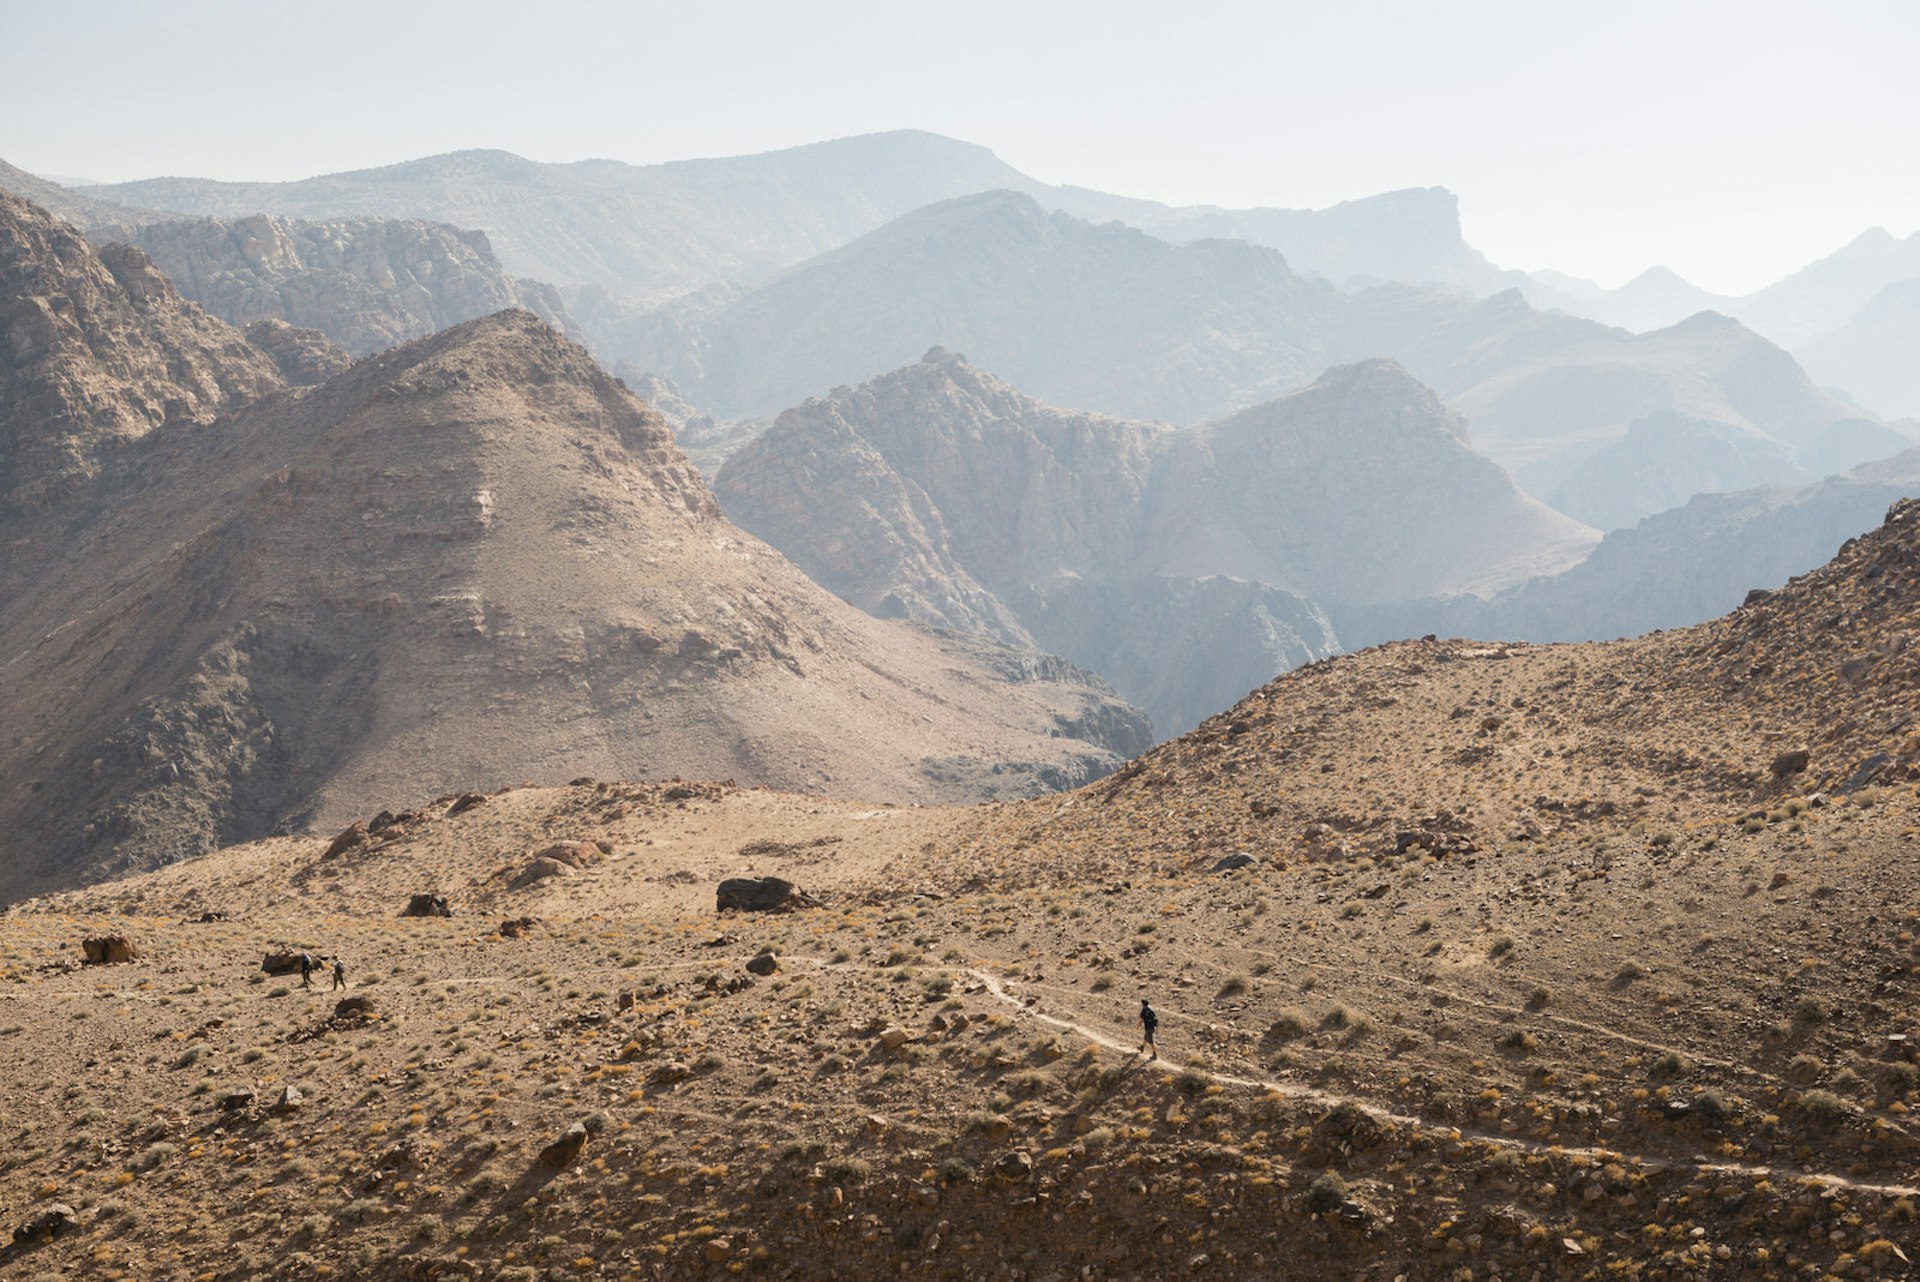 Hikers walk along a small path on the Jordan Trail with numerous mountains visible in the background